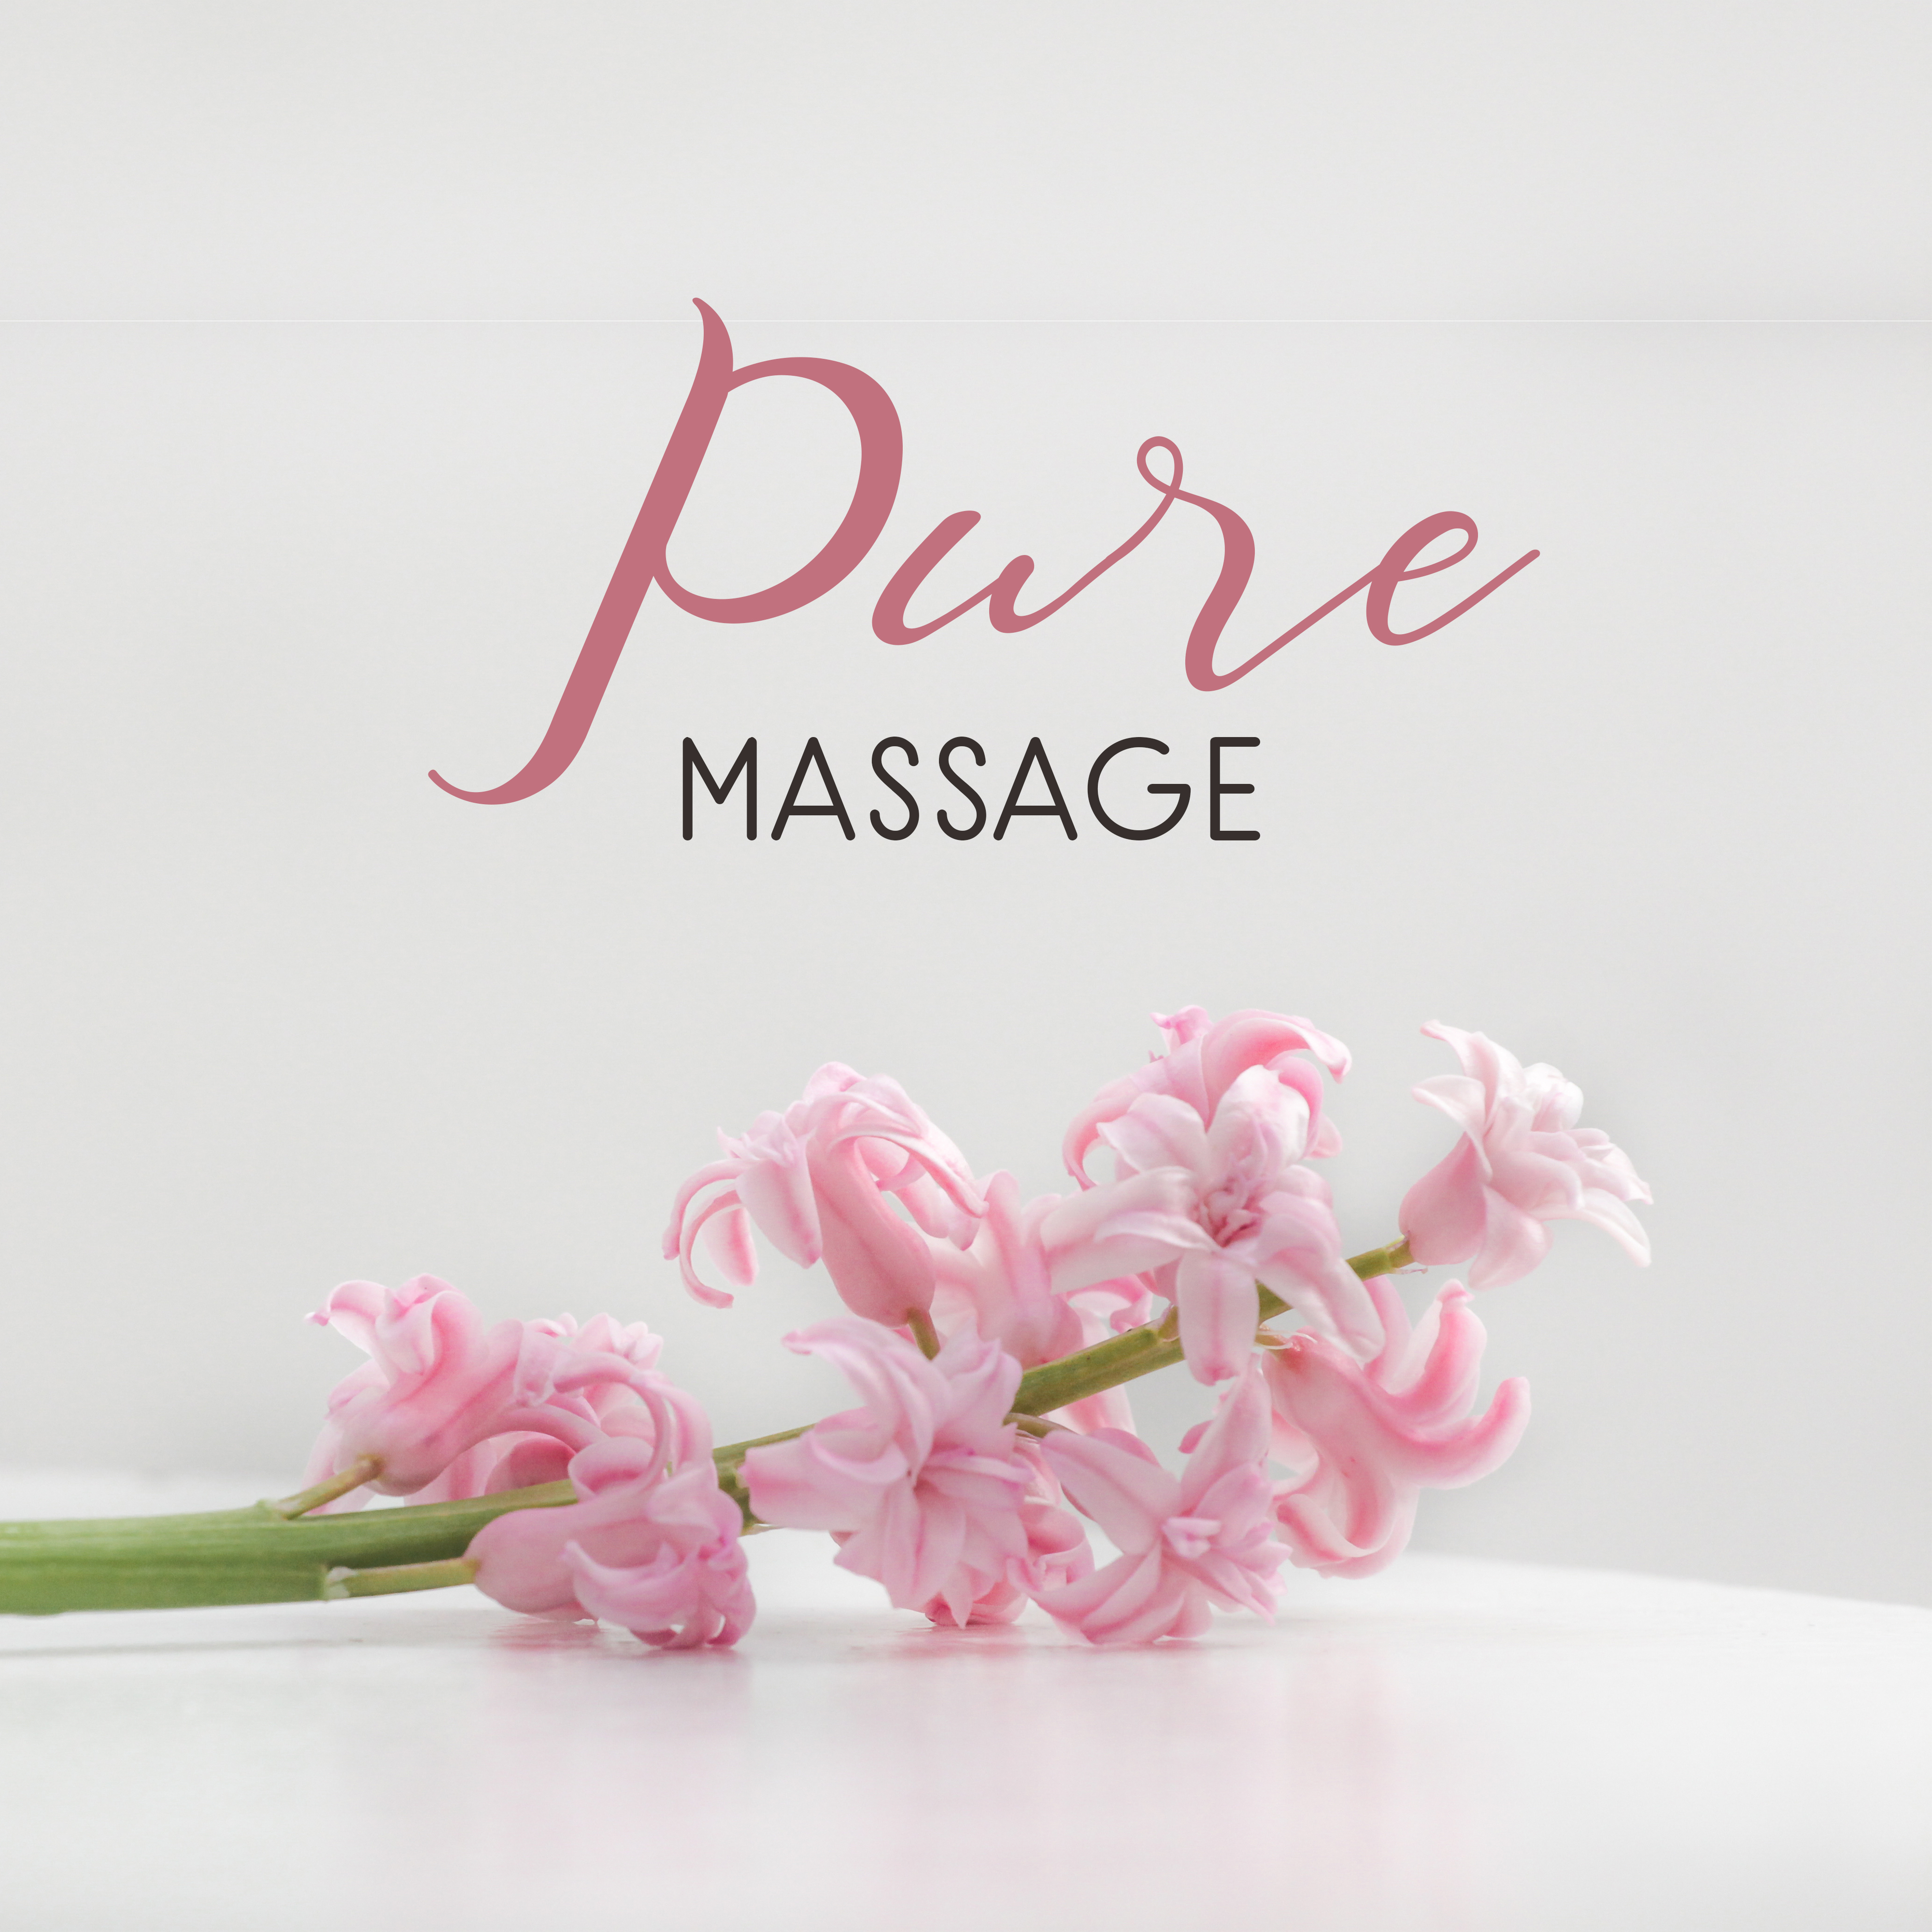 Pure Massage – Oriental Melodies for Wellness, Spa Music, Tibetan Sounds, Gentle Guitar, Soothing Piano, Nature Sounds for Relaxation